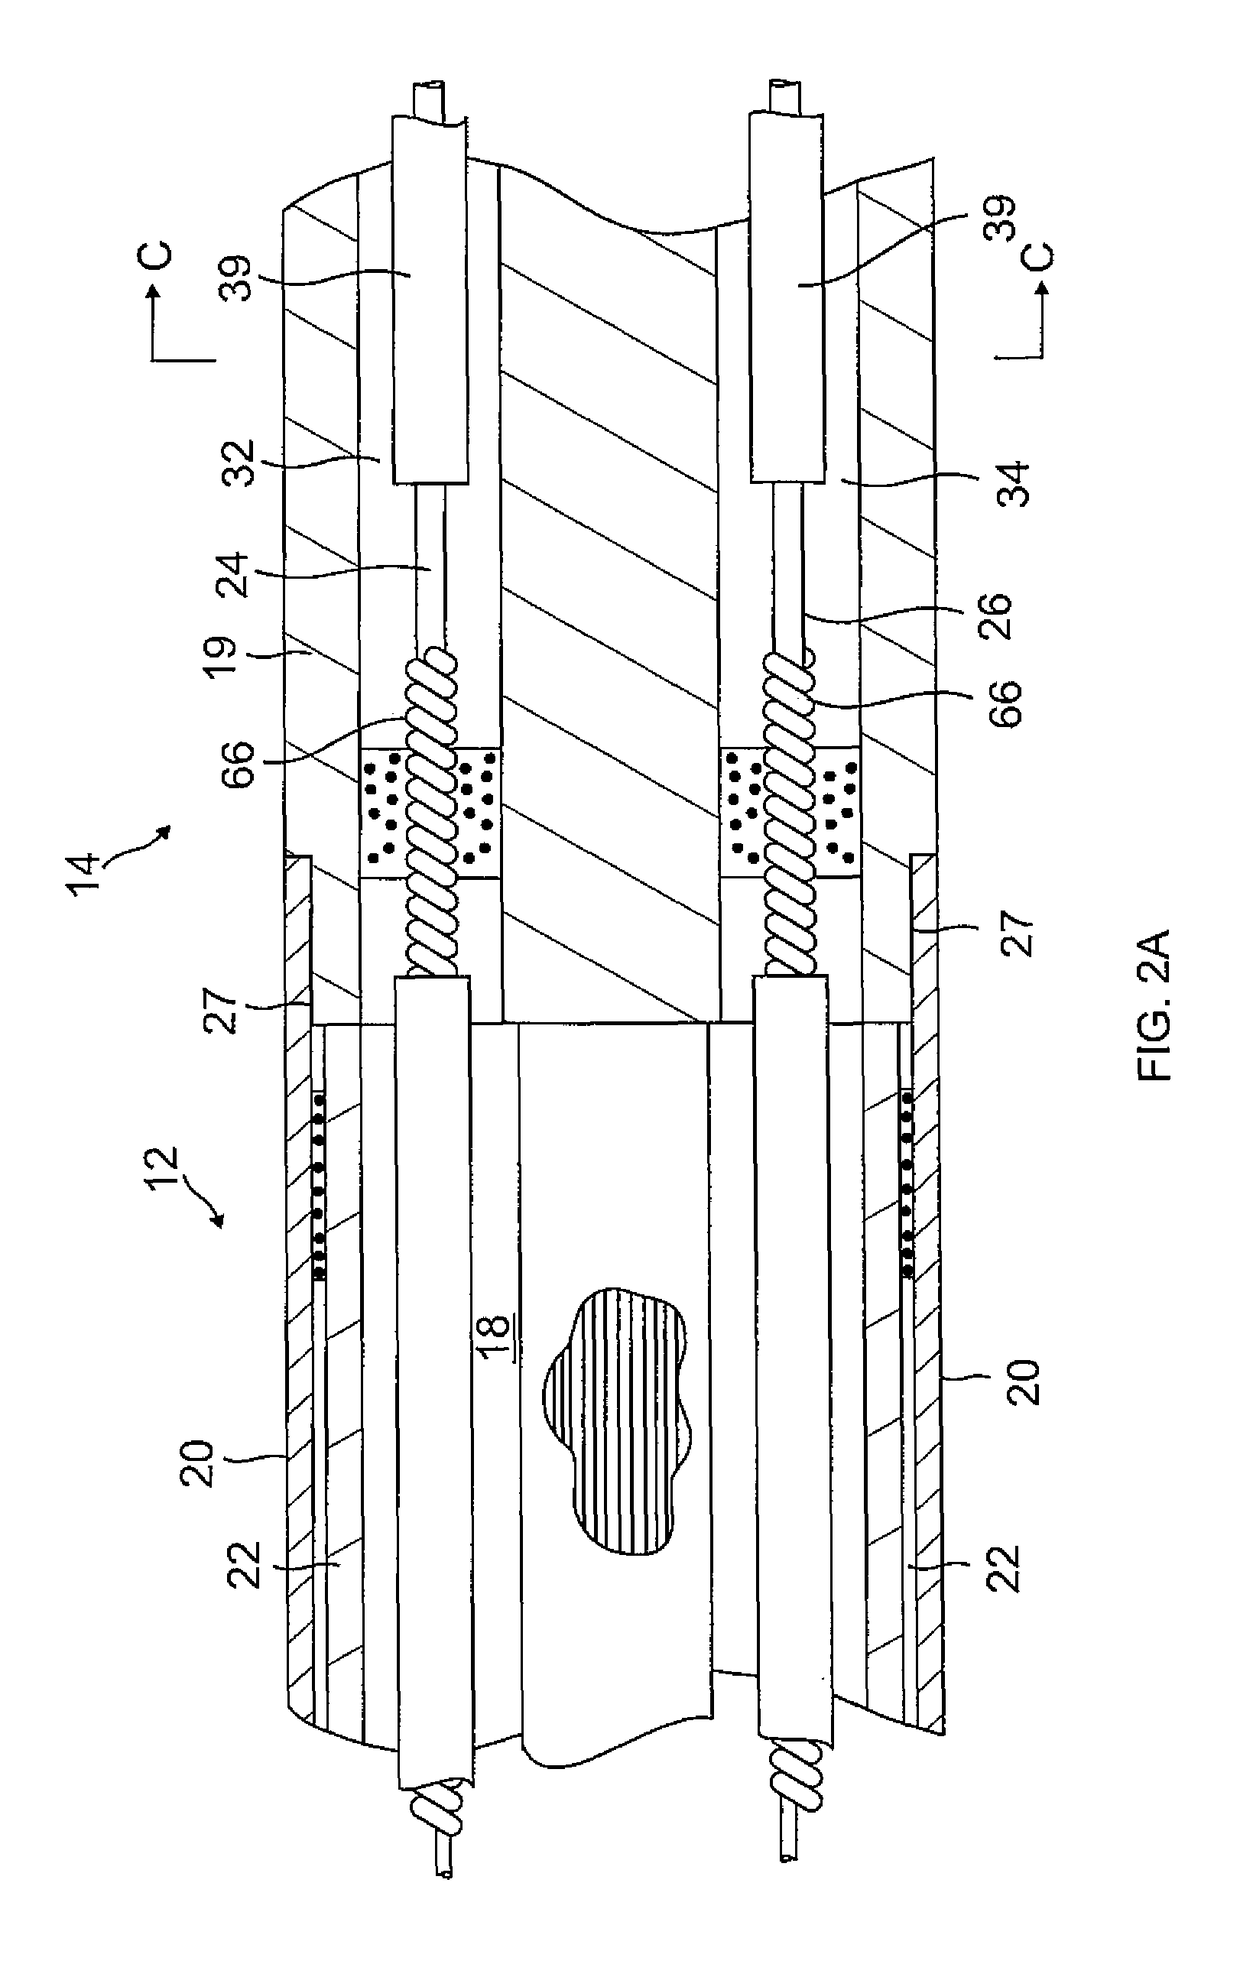 Catheter with high density electrode spine array